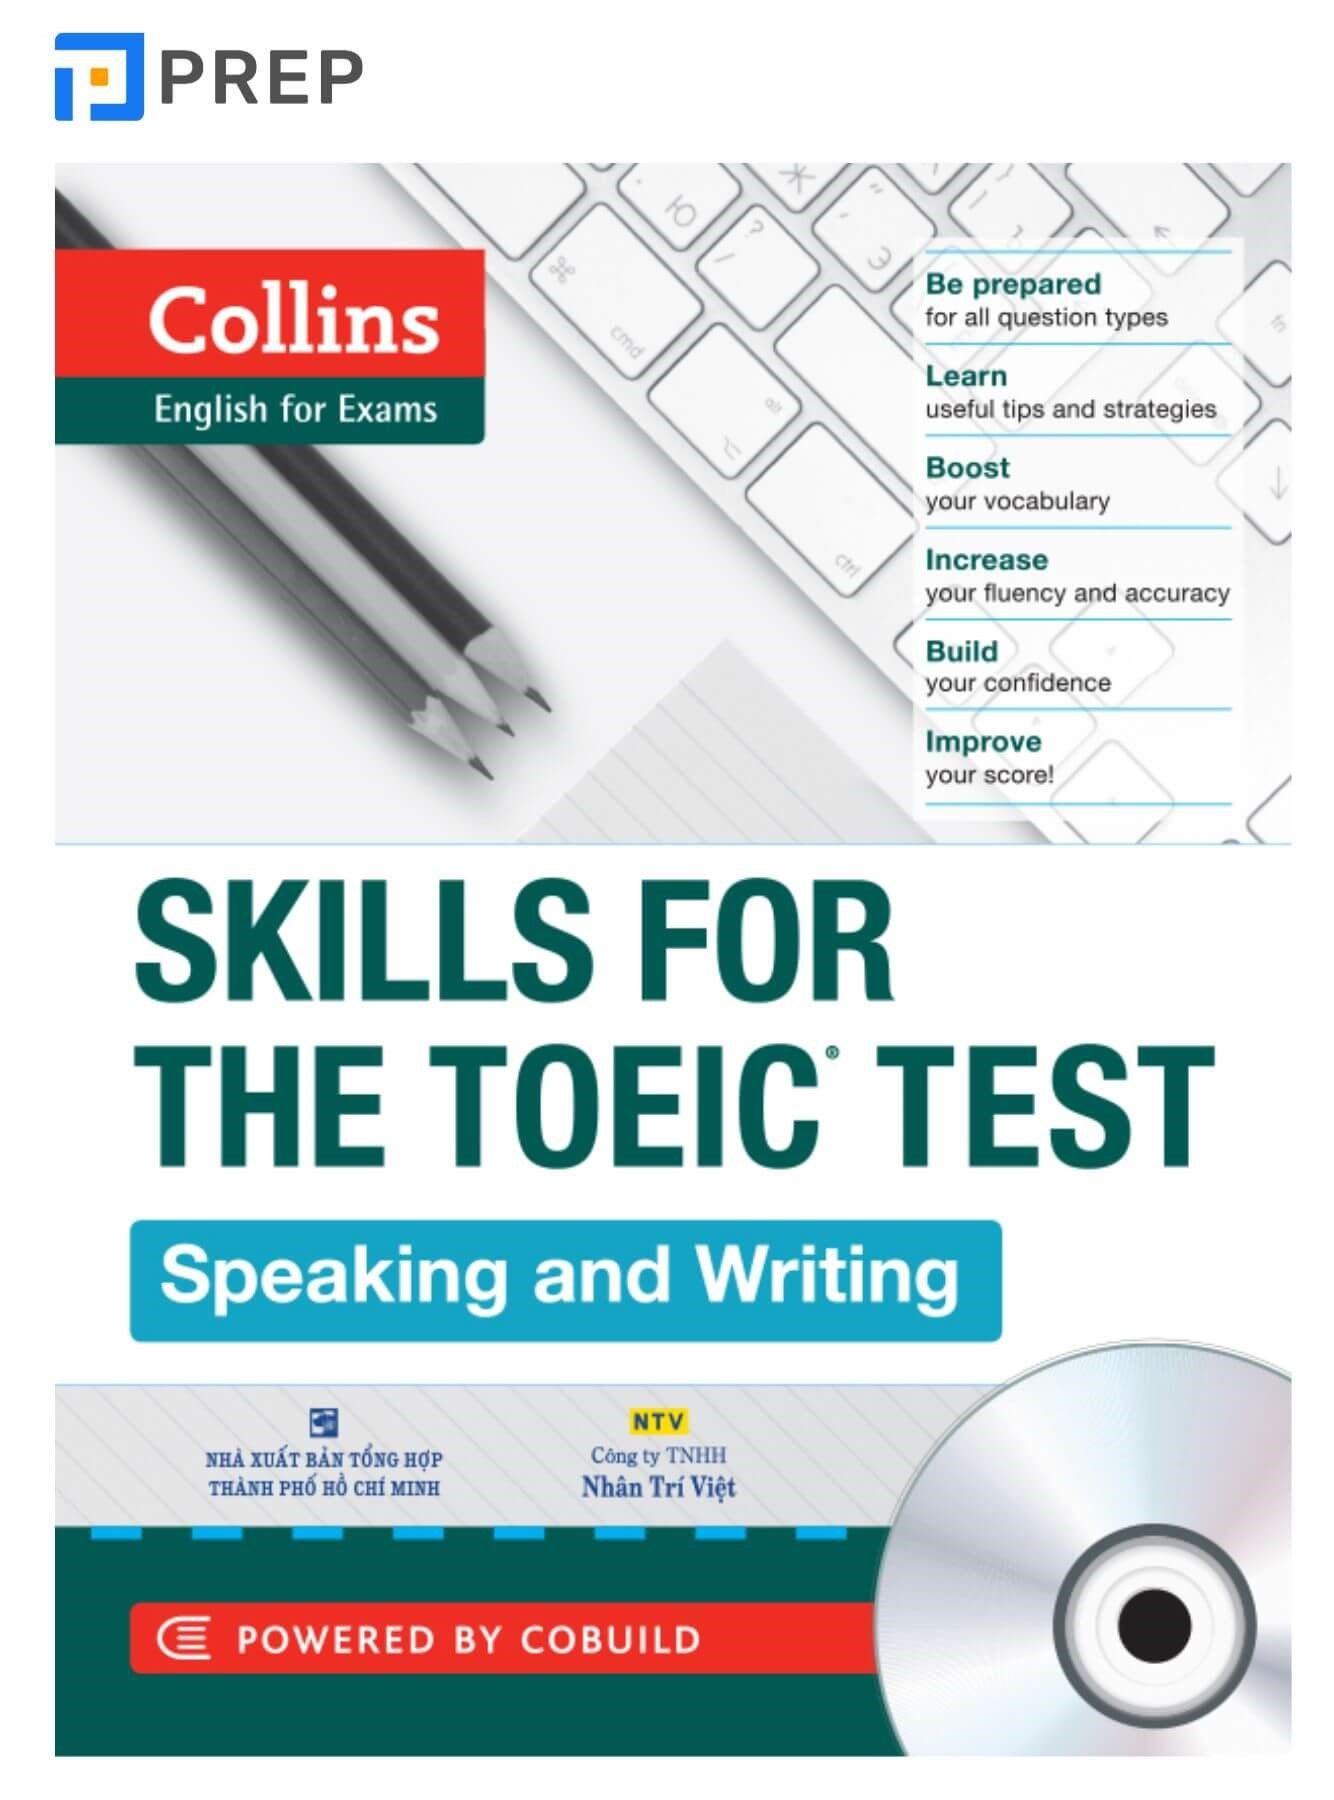 Skills for the TOEIC Test Speaking and Writing